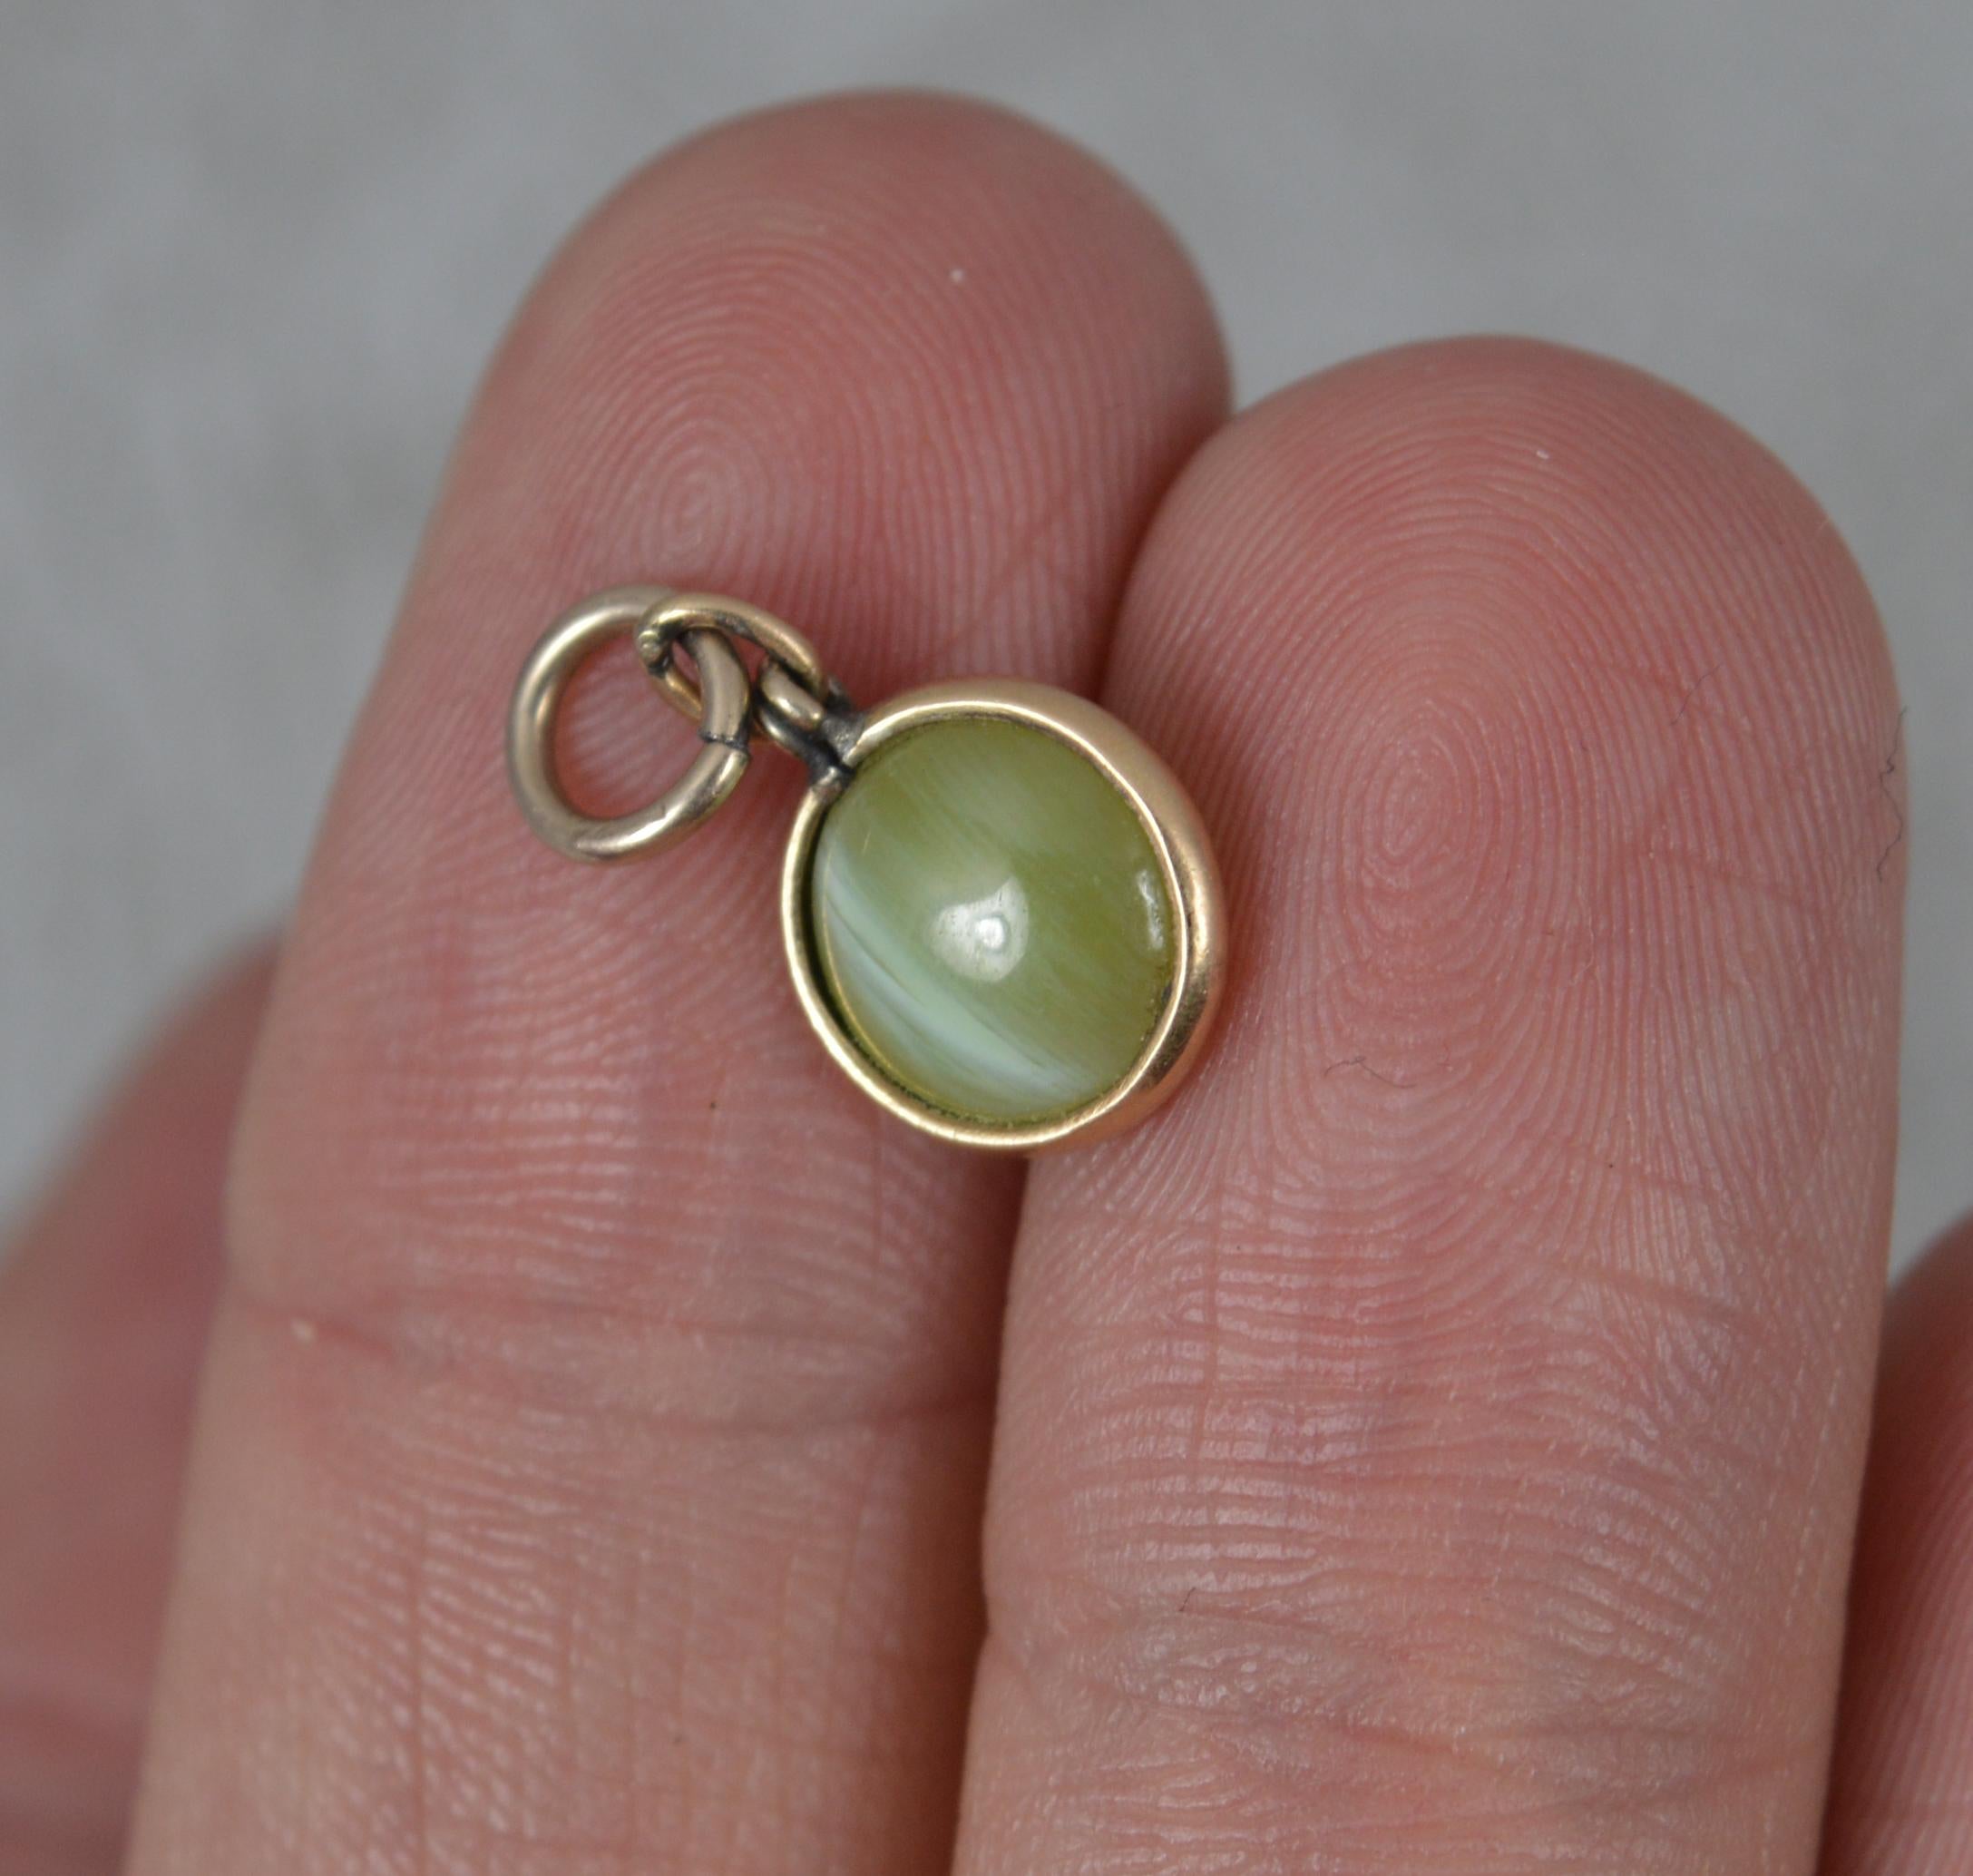 A Victorian era charm or pendant. Circa 1880.
Solid 9 carat rose gold bezel.
Set with a round cats eye chrysoberyl stone.

CONDITION ; Good for age. Clean design. Securely set stone. Light wear. Please view photographs.
WEIGHT ; 0.7 grams
SIZE ;